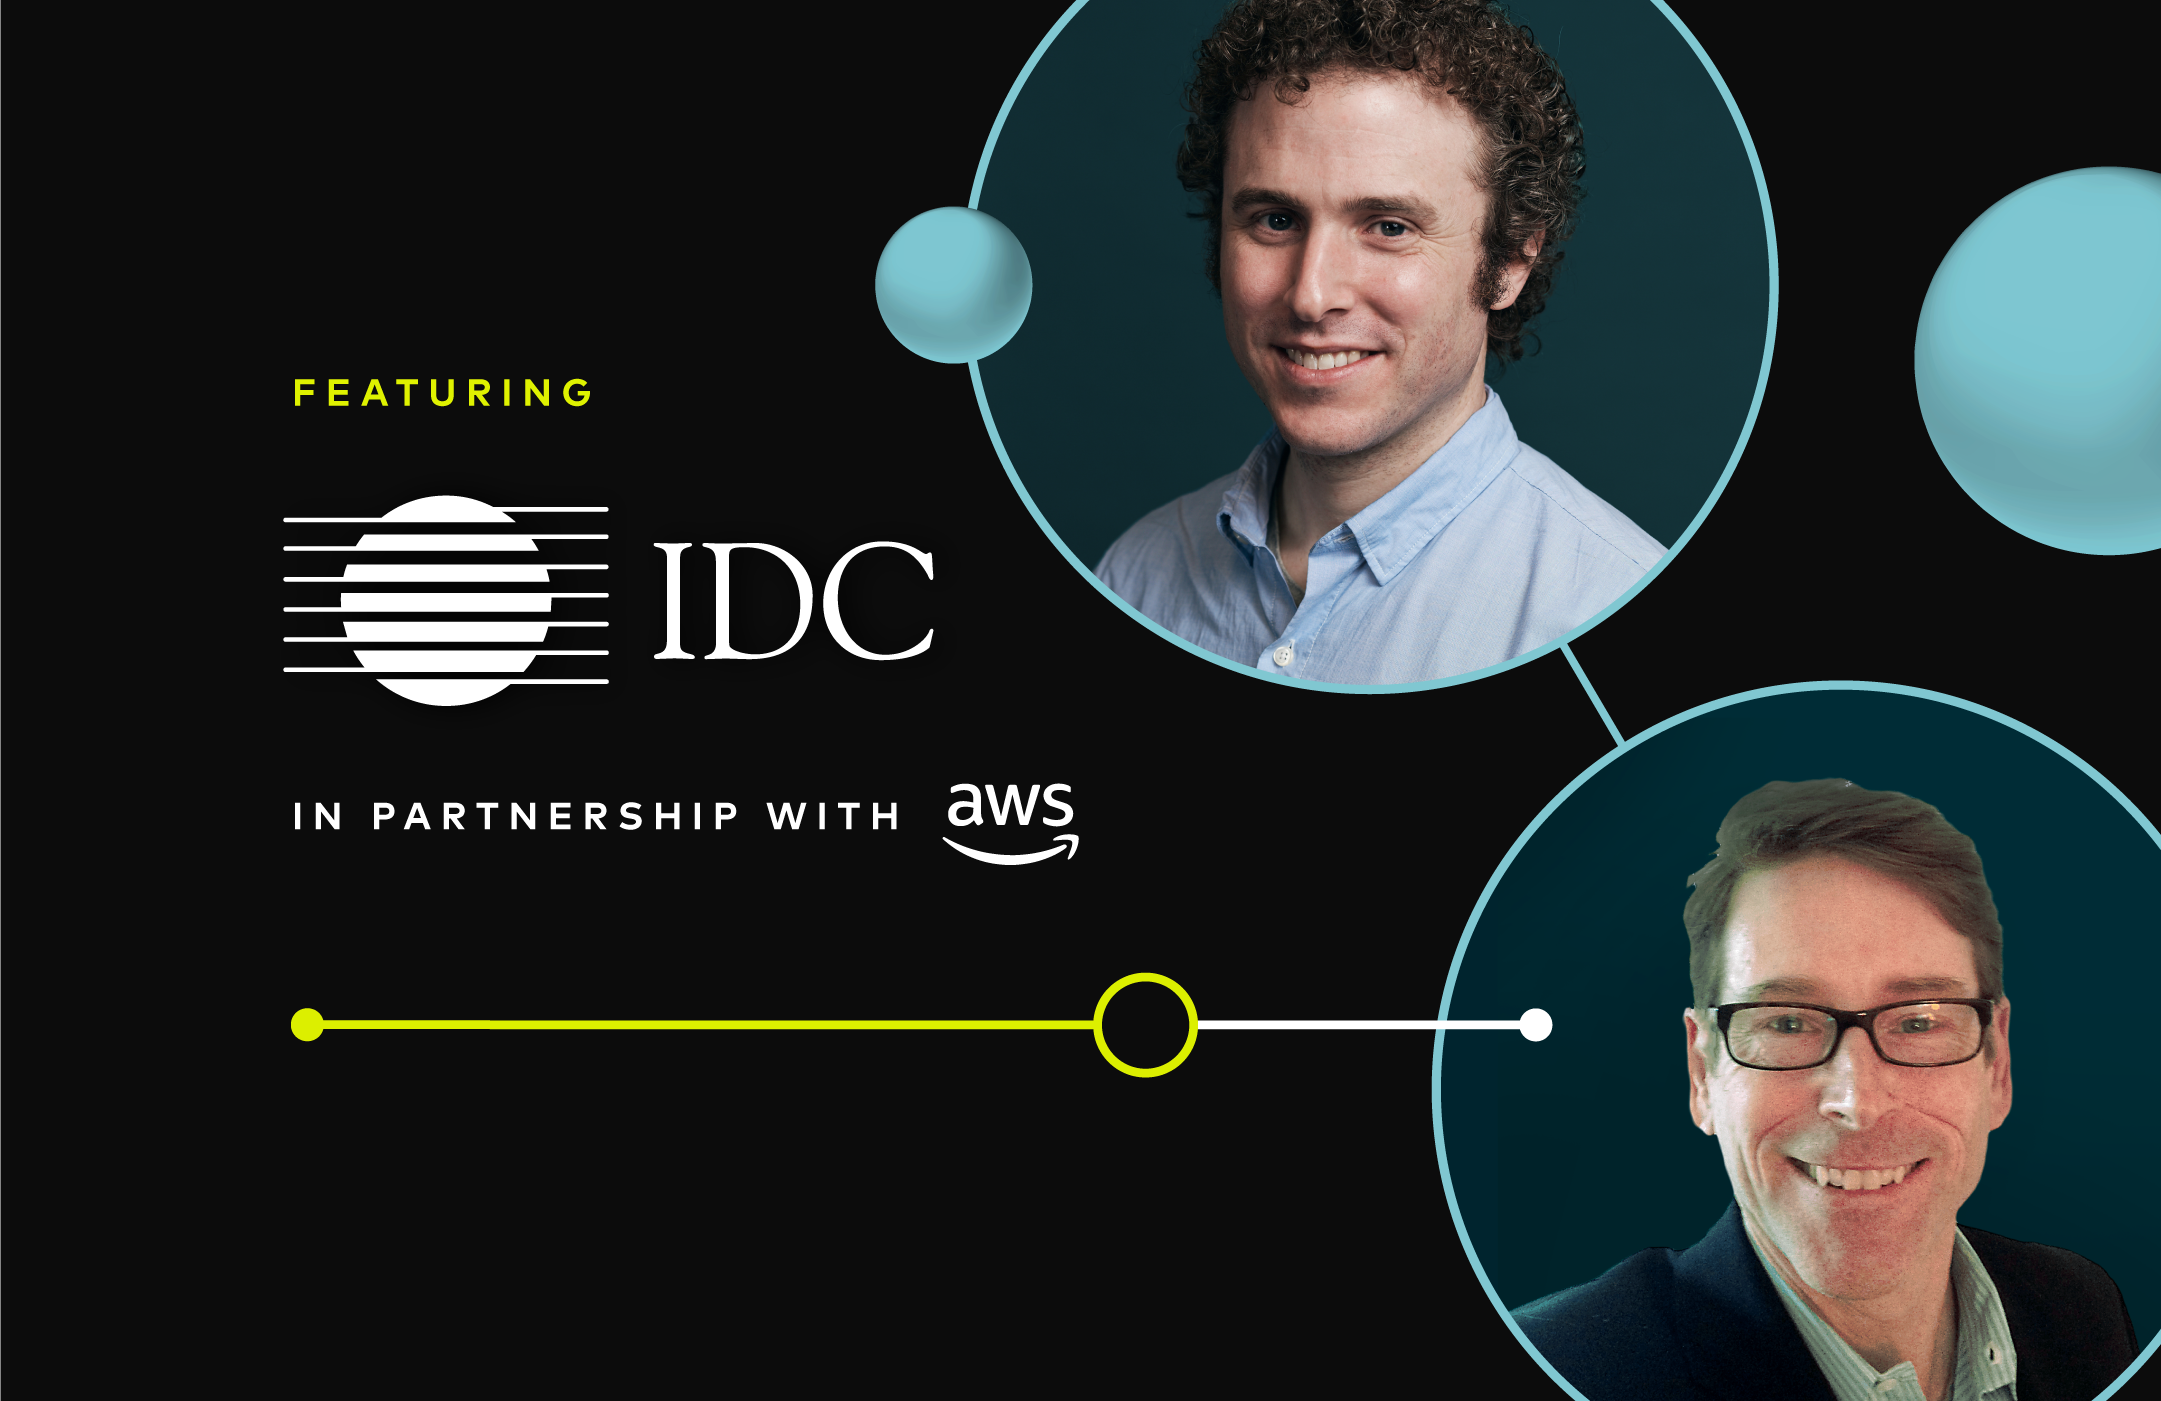 Featuring IDC in partnership with AWS